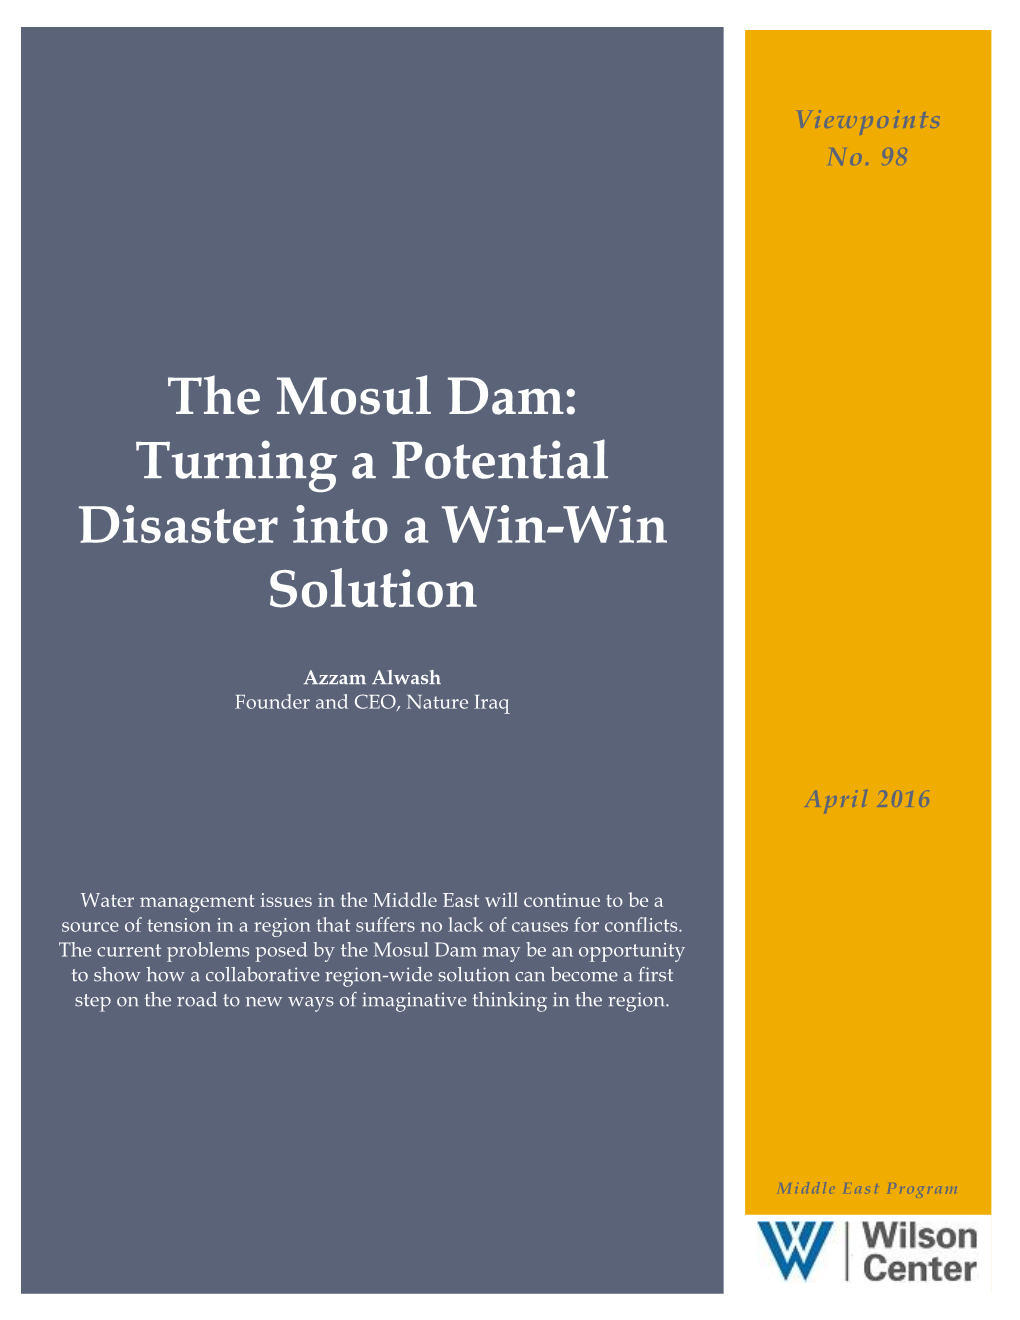 The Mosul Dam: Turning a Potential